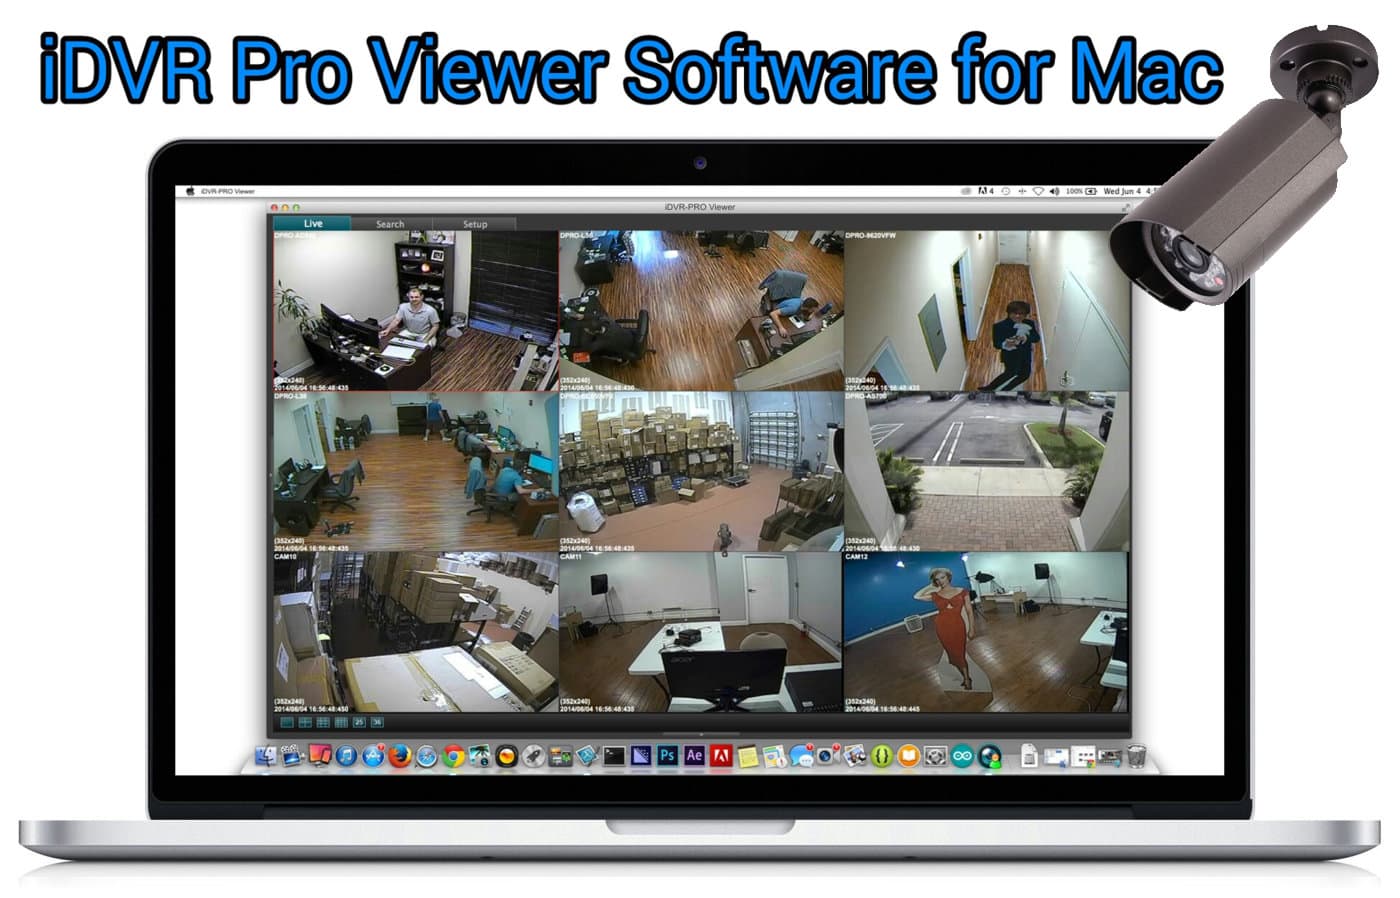 View CCTV Cameras from Mac Software